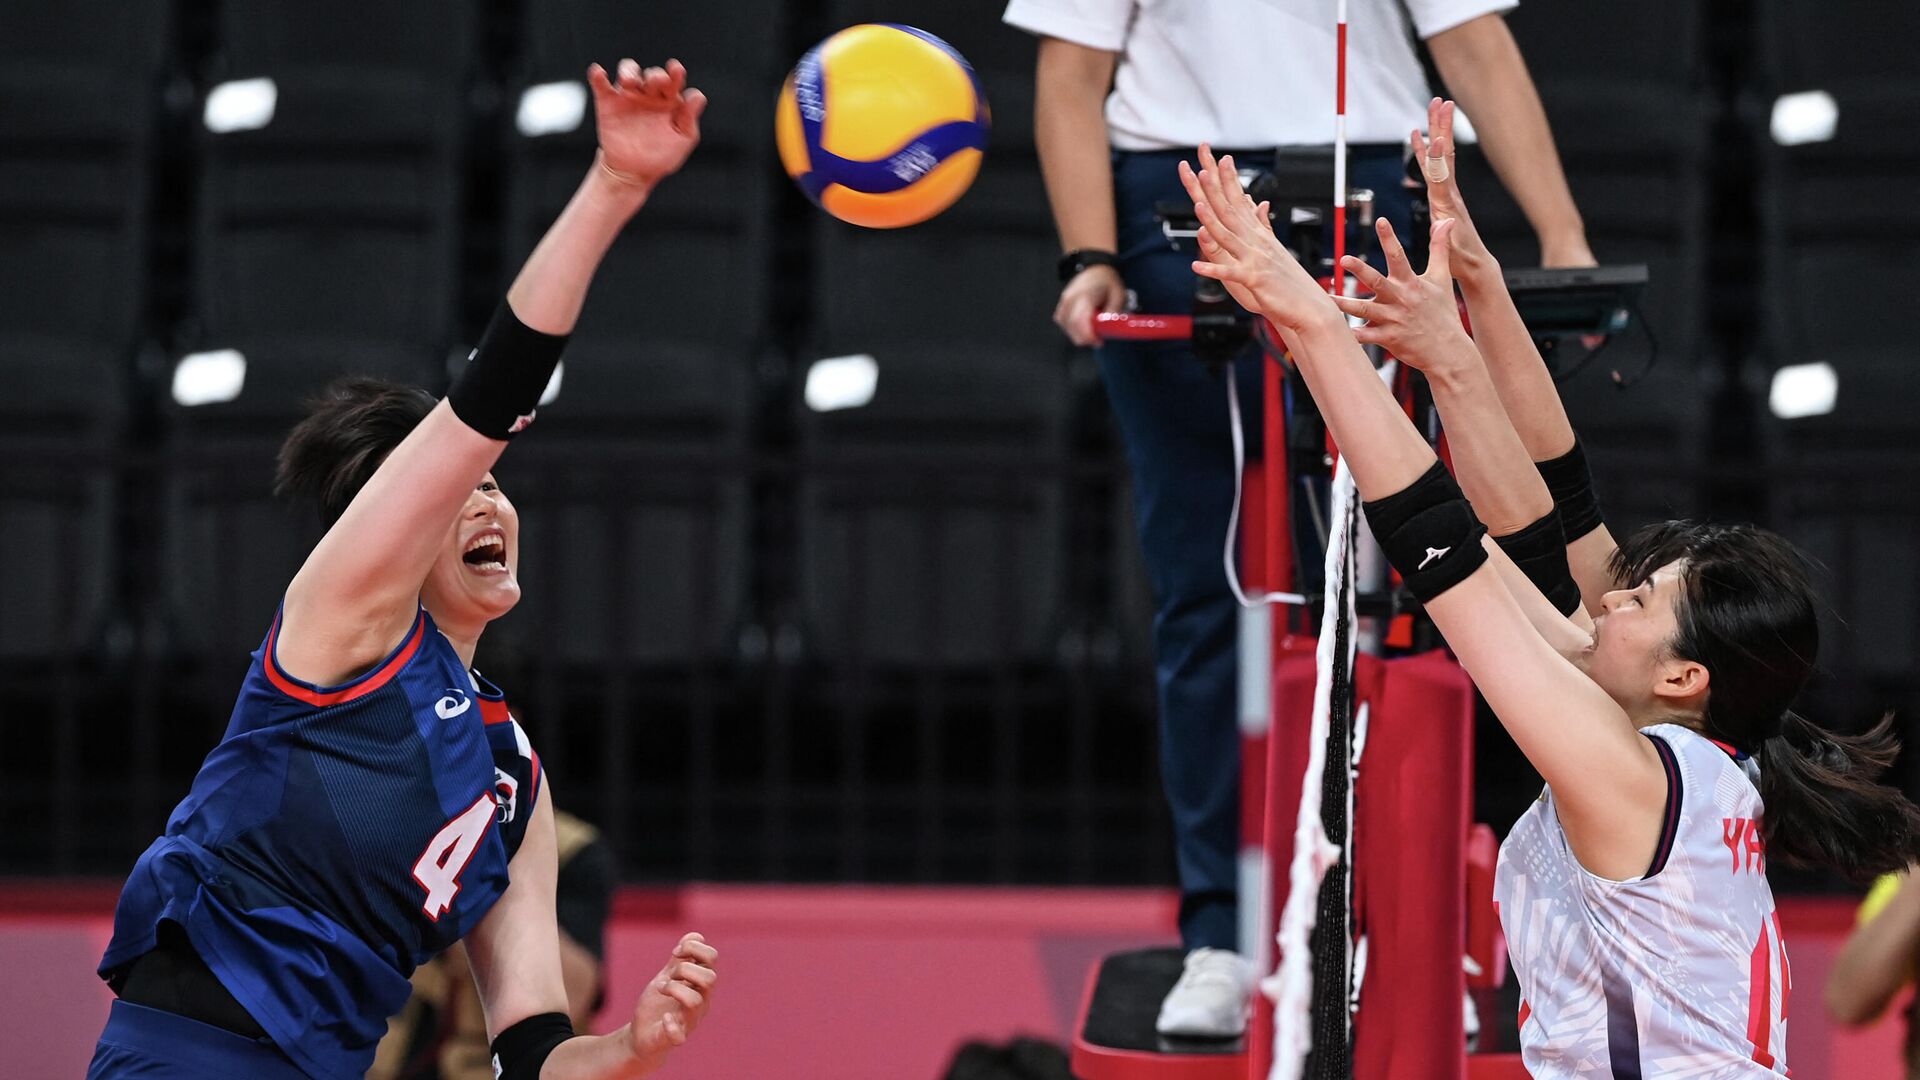 South Korea's Kim Hee-jin hits the ball in the women's preliminary round pool A volleyball match between Japan and South Korea during the Tokyo 2020 Olympic Games at Ariake Arena in Tokyo on July 31, 2021. (Photo by JUNG Yeon-je / AFP) - РИА Новости, 1920, 31.07.2021